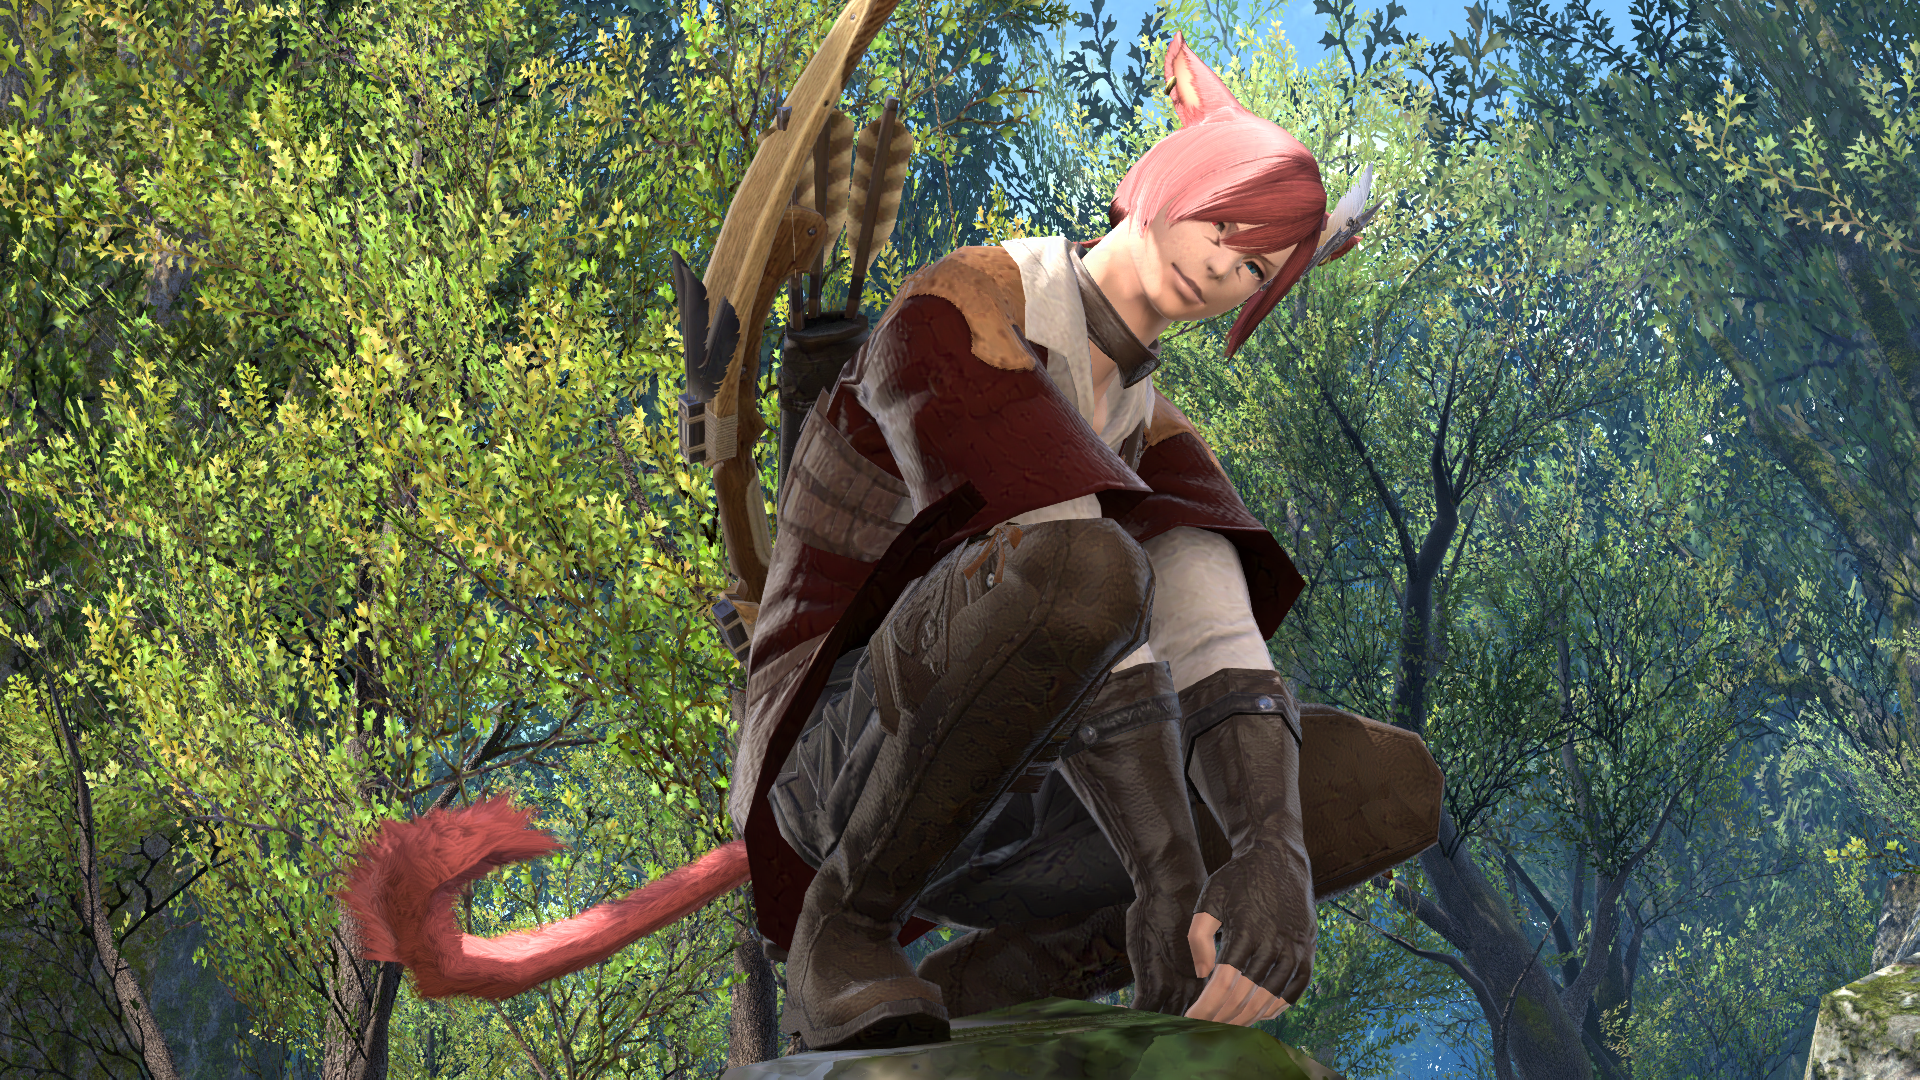 G'raha Tia - a Miqo'te of the Seeker of the Sun clan, perched on top of a rock and smiling at the viewer, his archer's bow on his back.